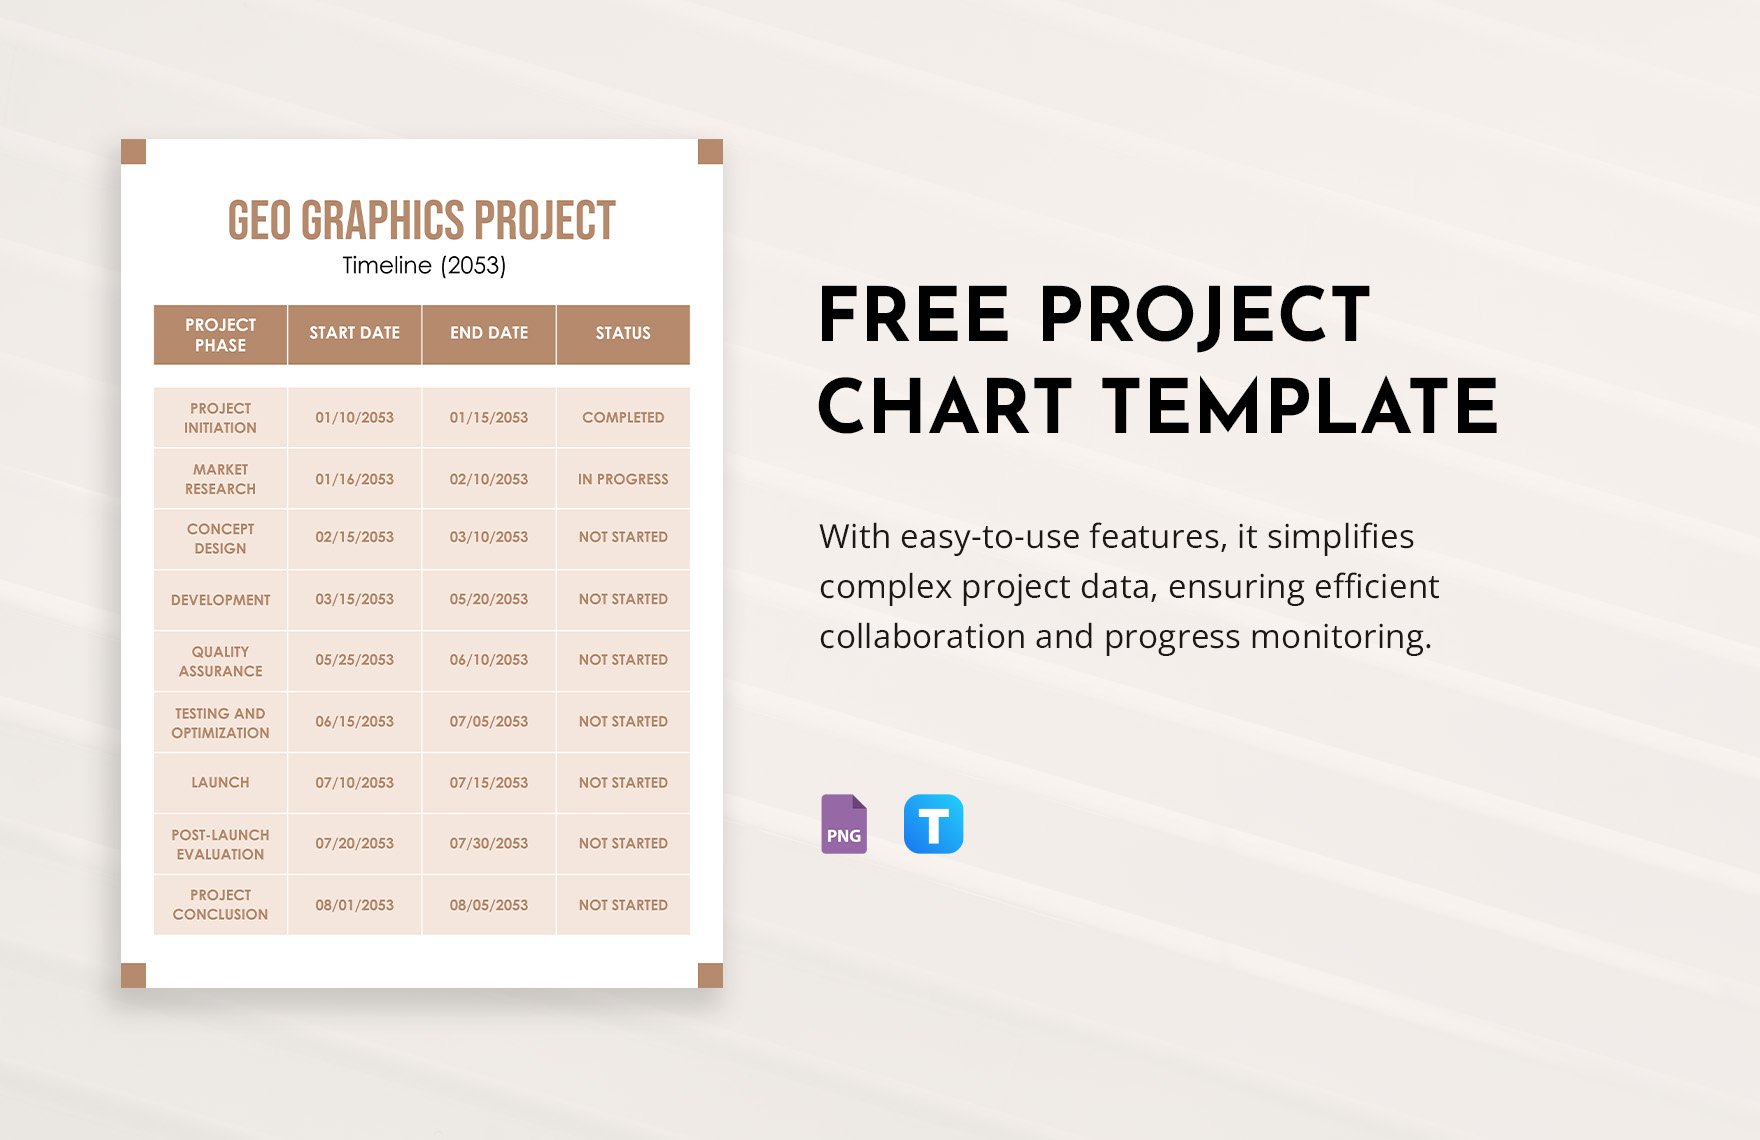 Free Project Chart Template in PNG